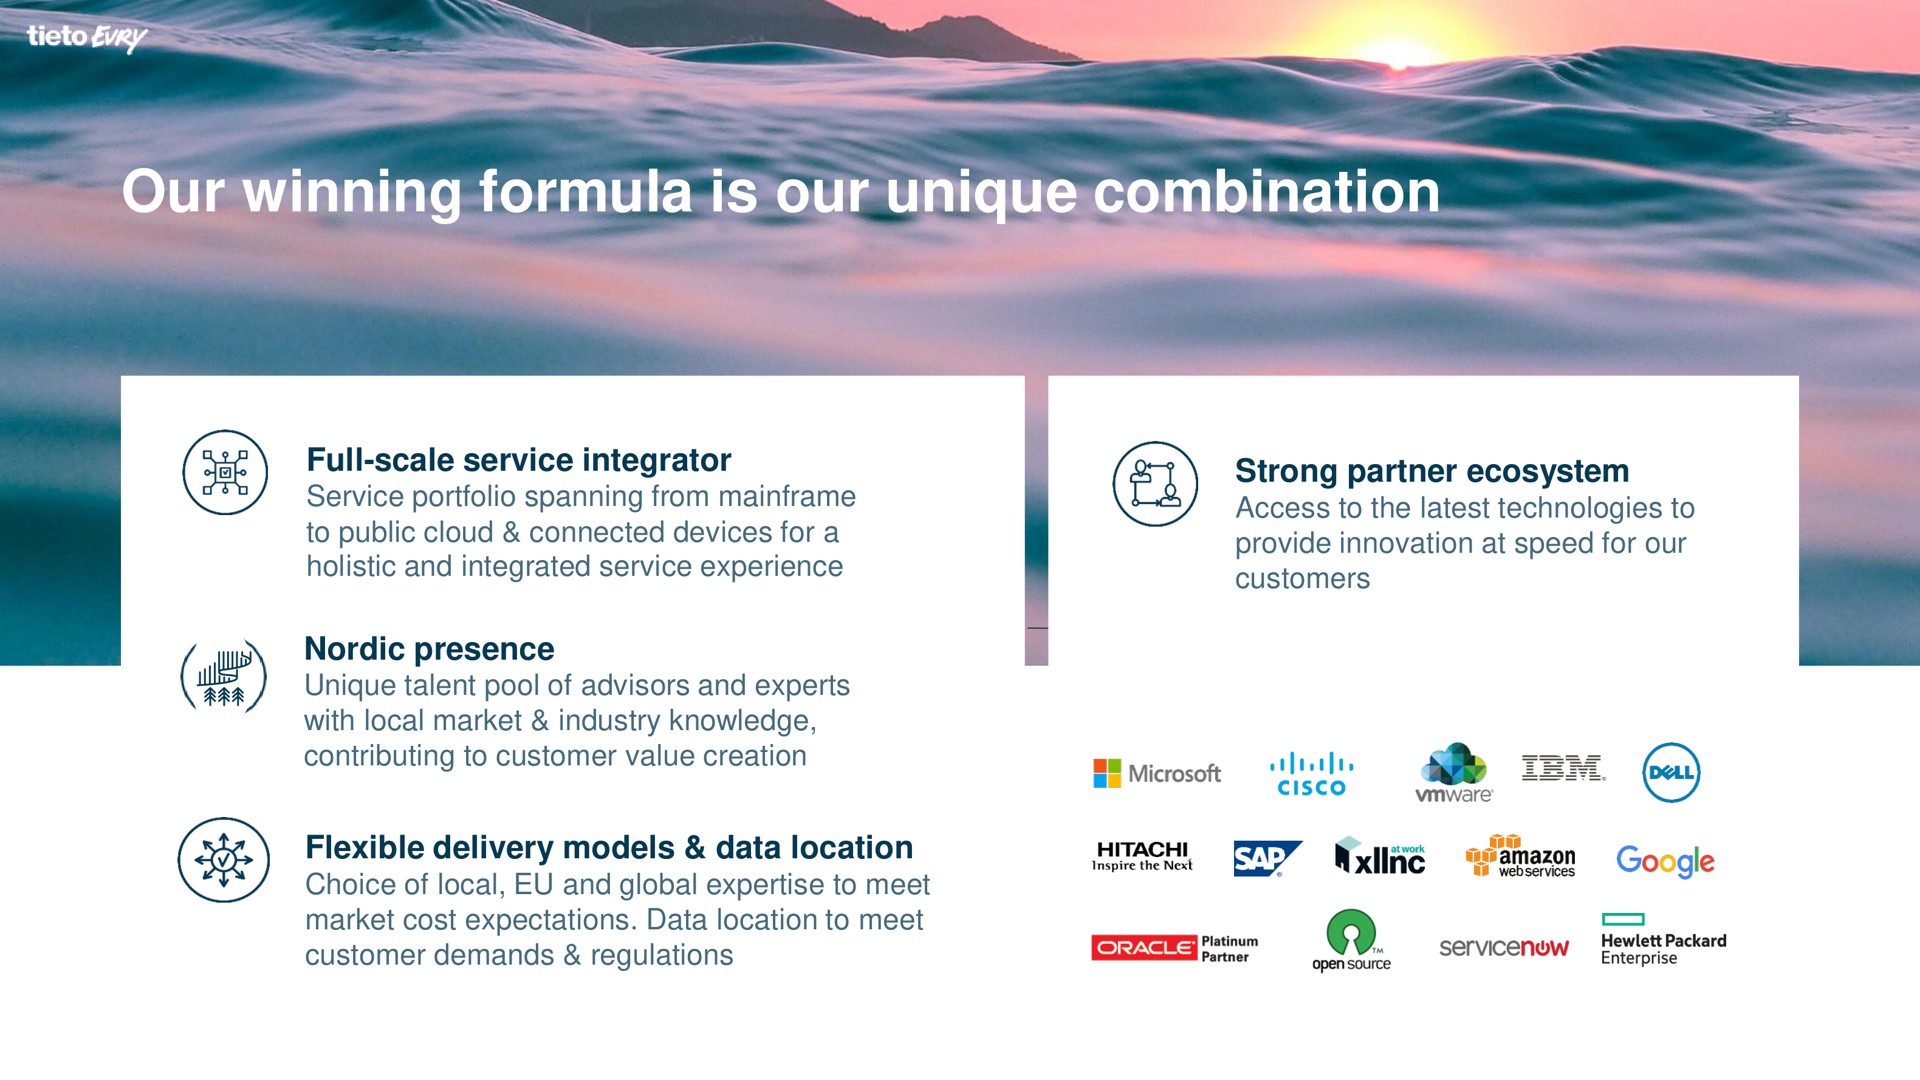 our winning formula is our unique combination | Tietoevry